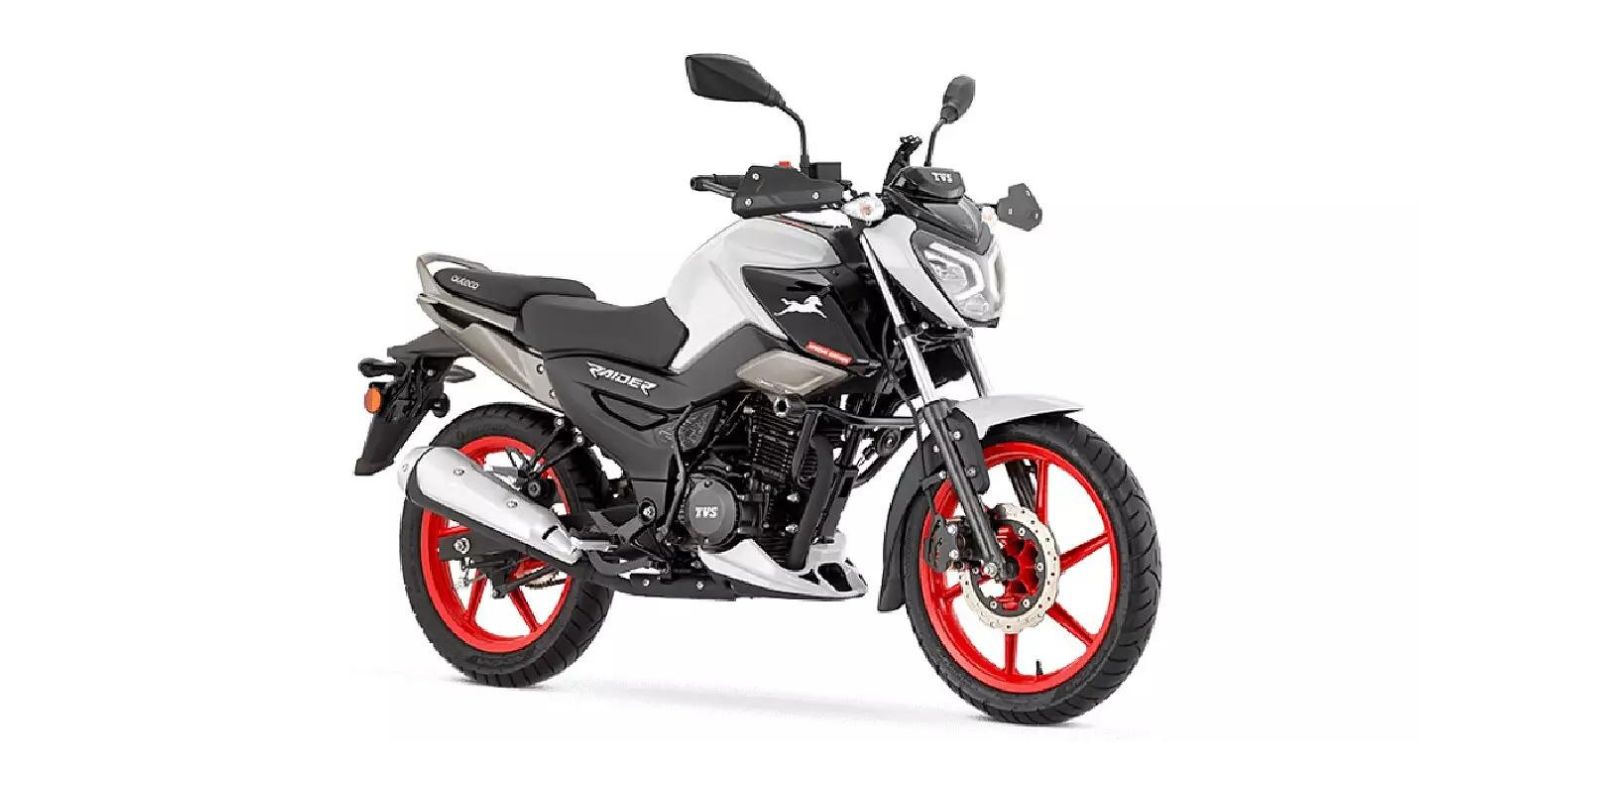 Meet The New Special Edition TVS Raider 125 With A Host Of Updates